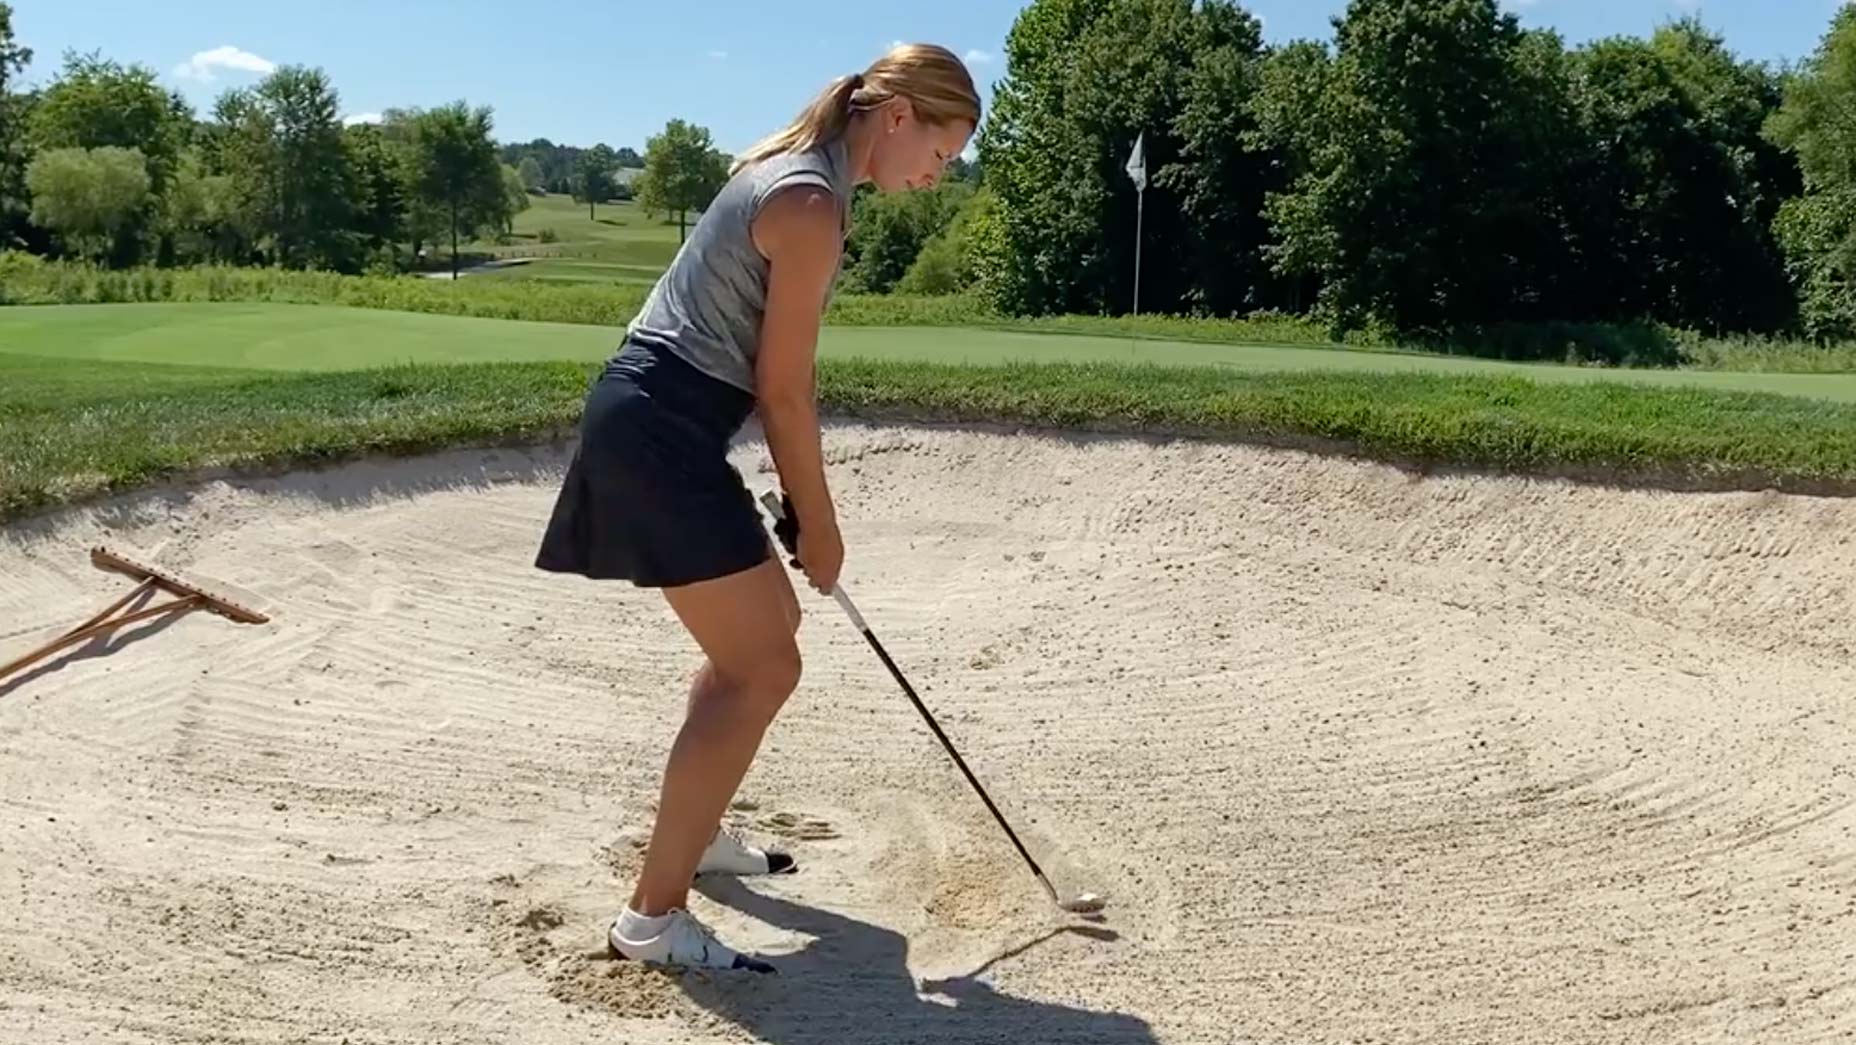 How to hit a bunker shot: 5 easy steps to get up-and-down from the sand